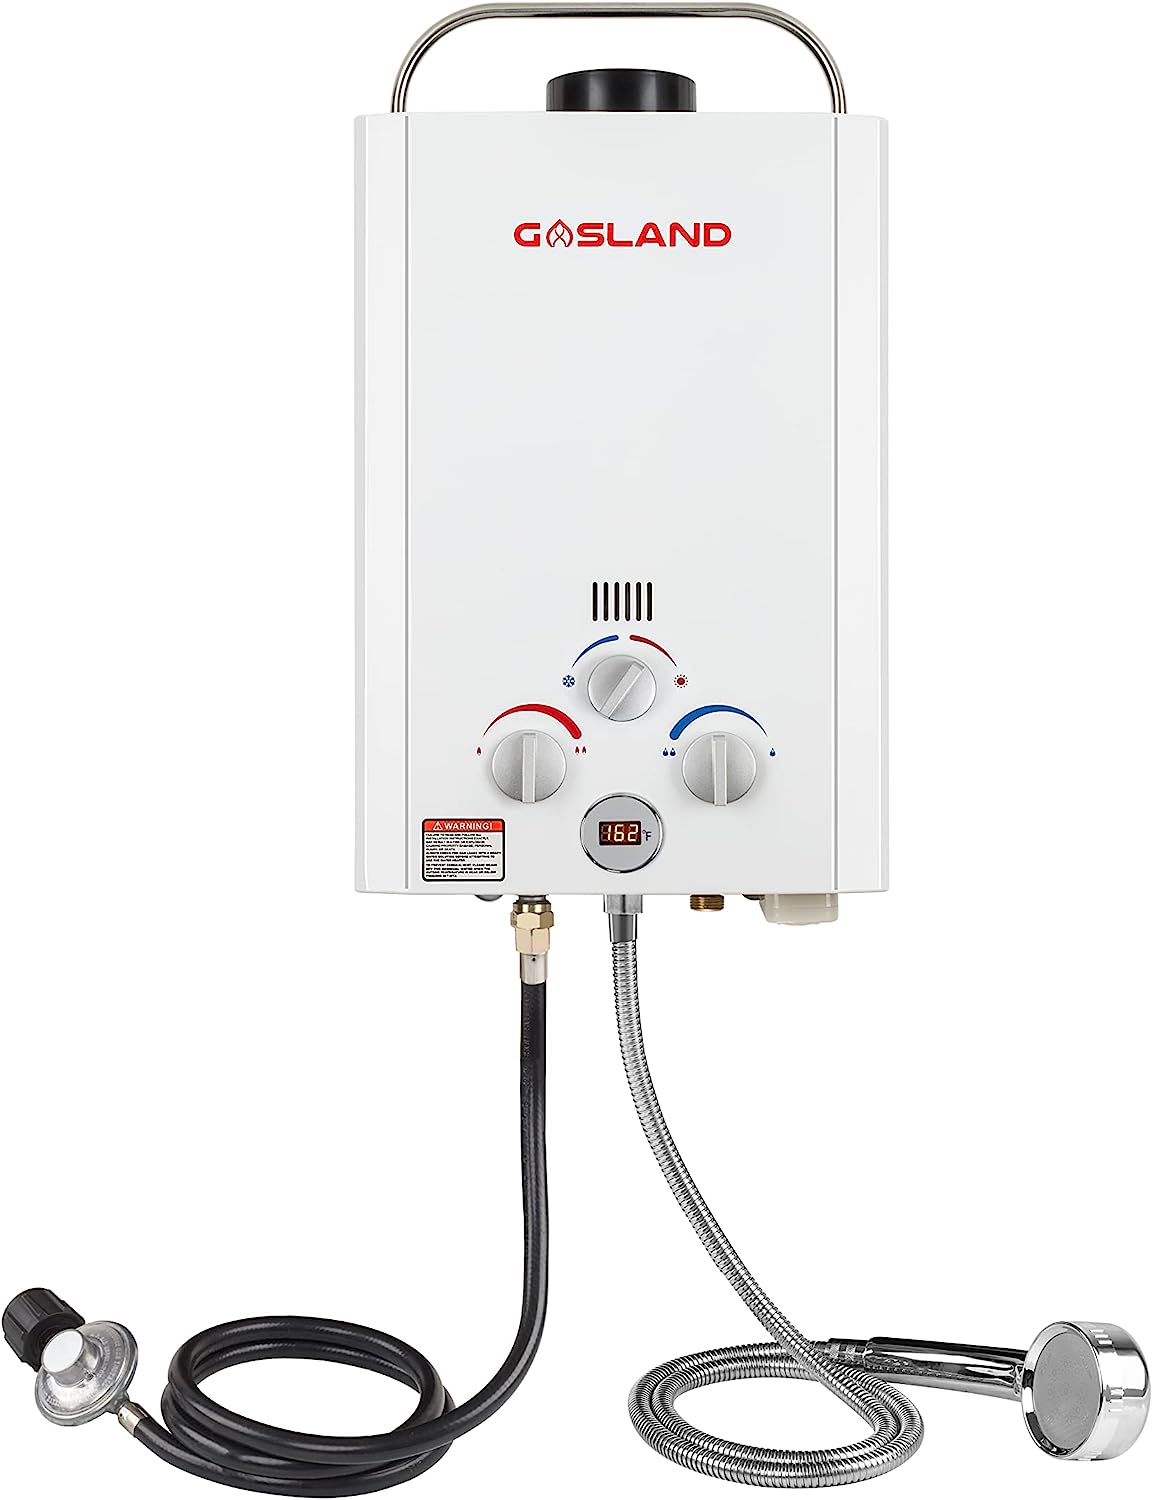 Tankless Water Heater, GASLAND Outdoors BE158 1.58GPM [...]